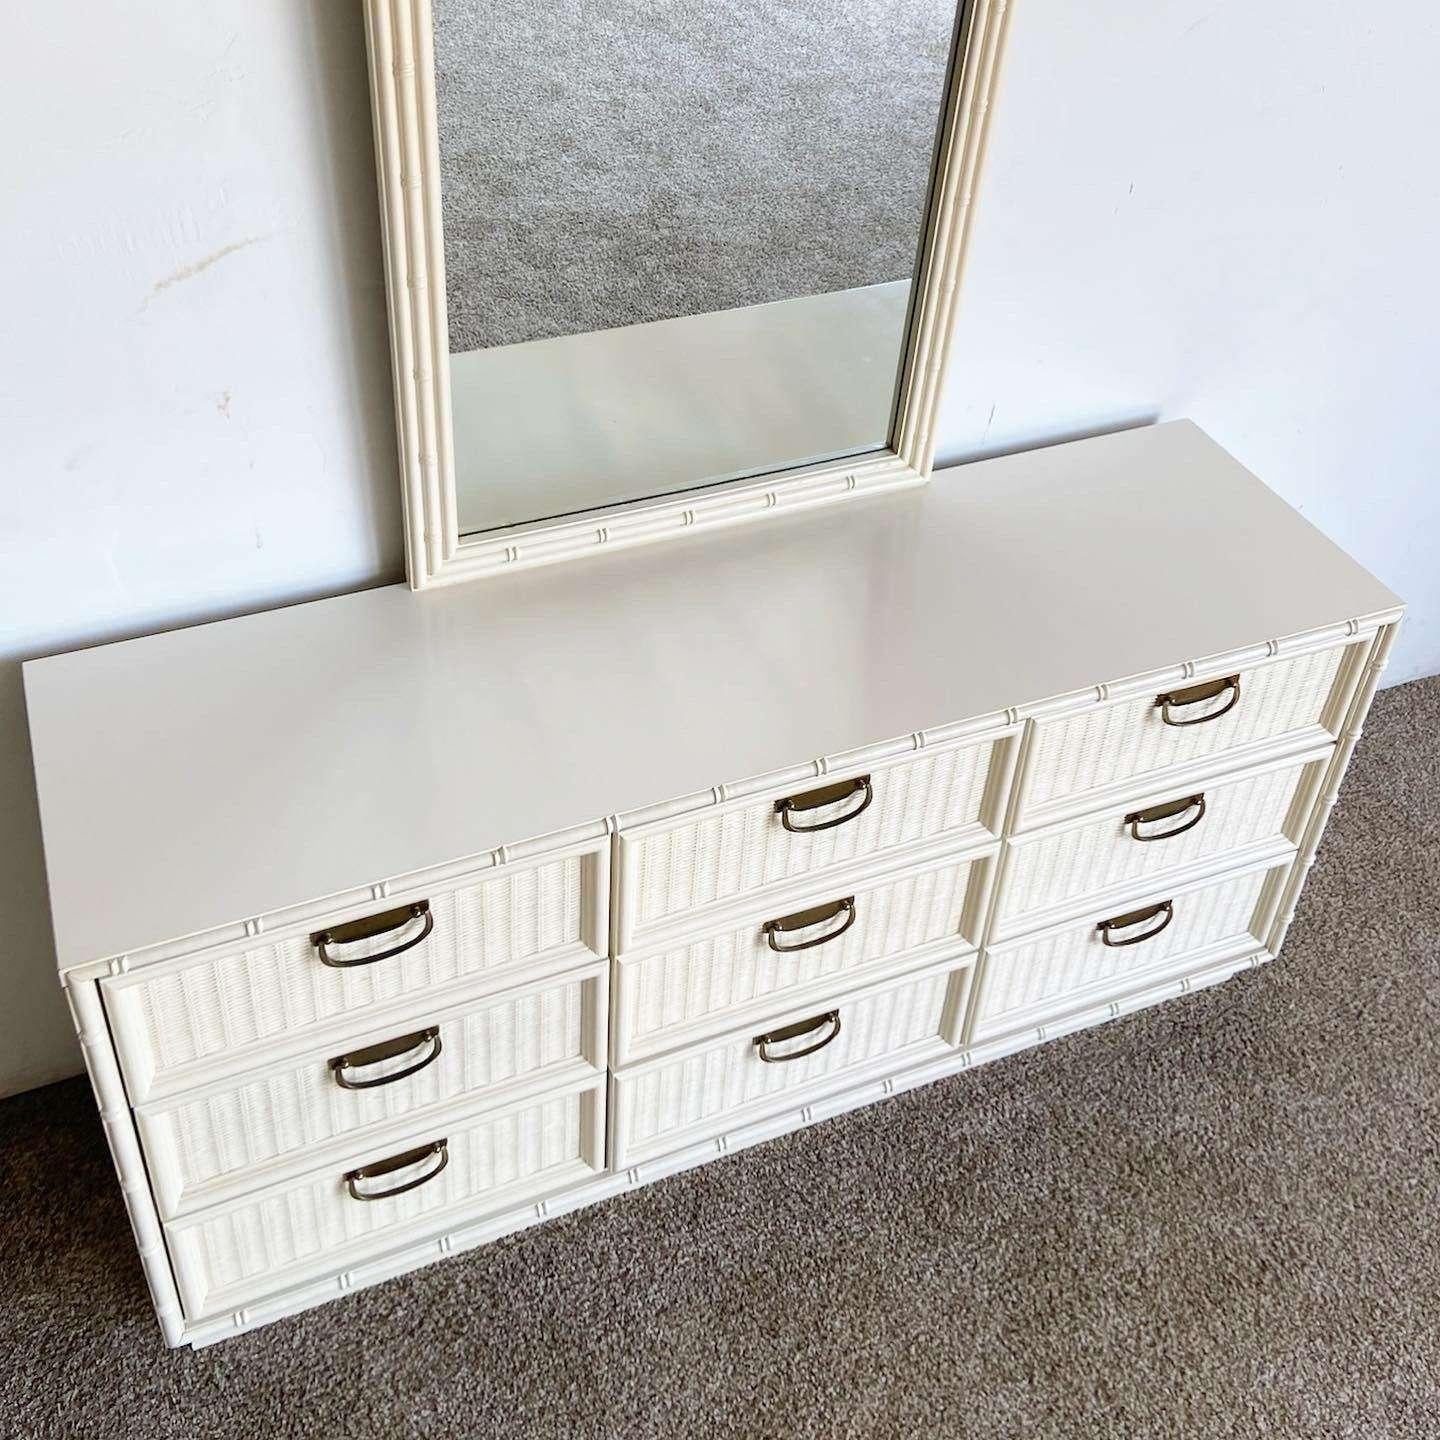 Incredible vintage bohemian faux bamboo dresser with matching mirror. Features faux wicker drawer faces with an off white finish.

Mirror measures 28”W, 1.5”D, 47.5”H
